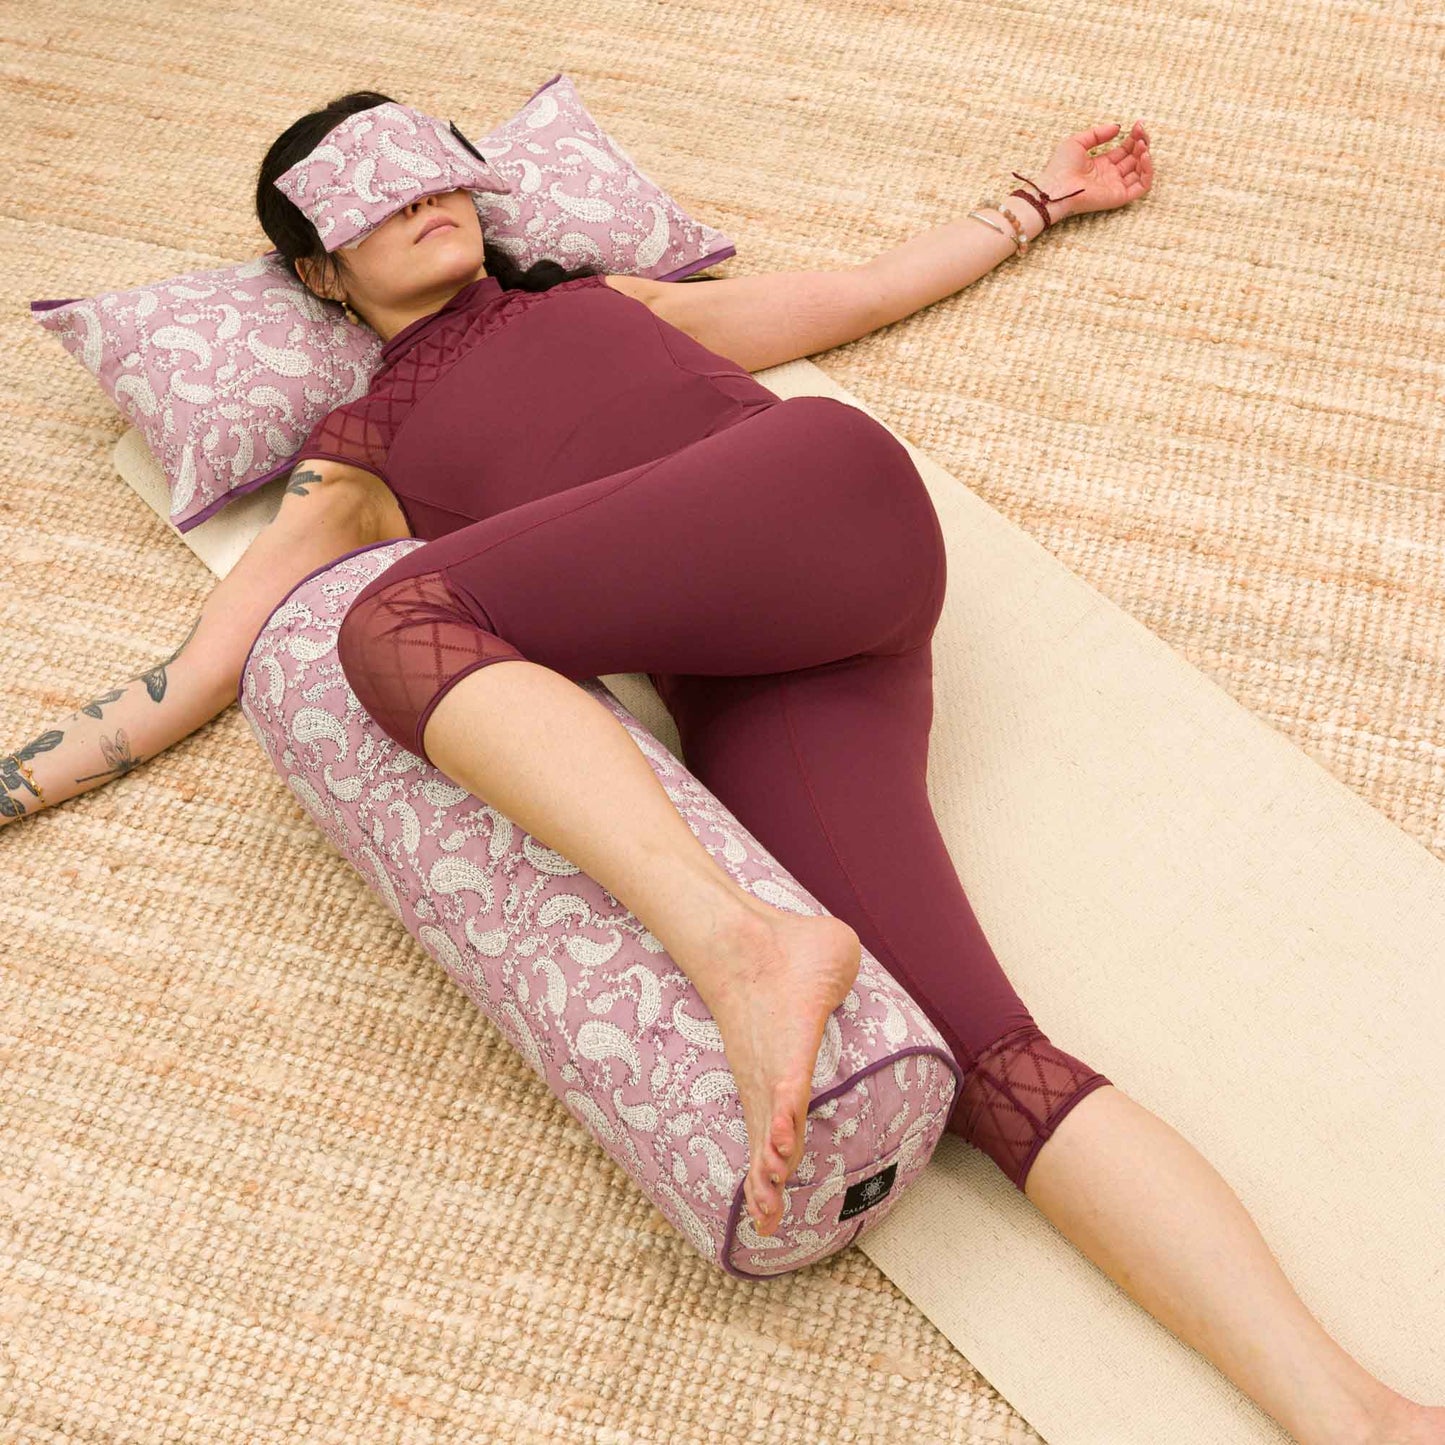 3 Easy Relaxation Yoga Poses With a Bolster